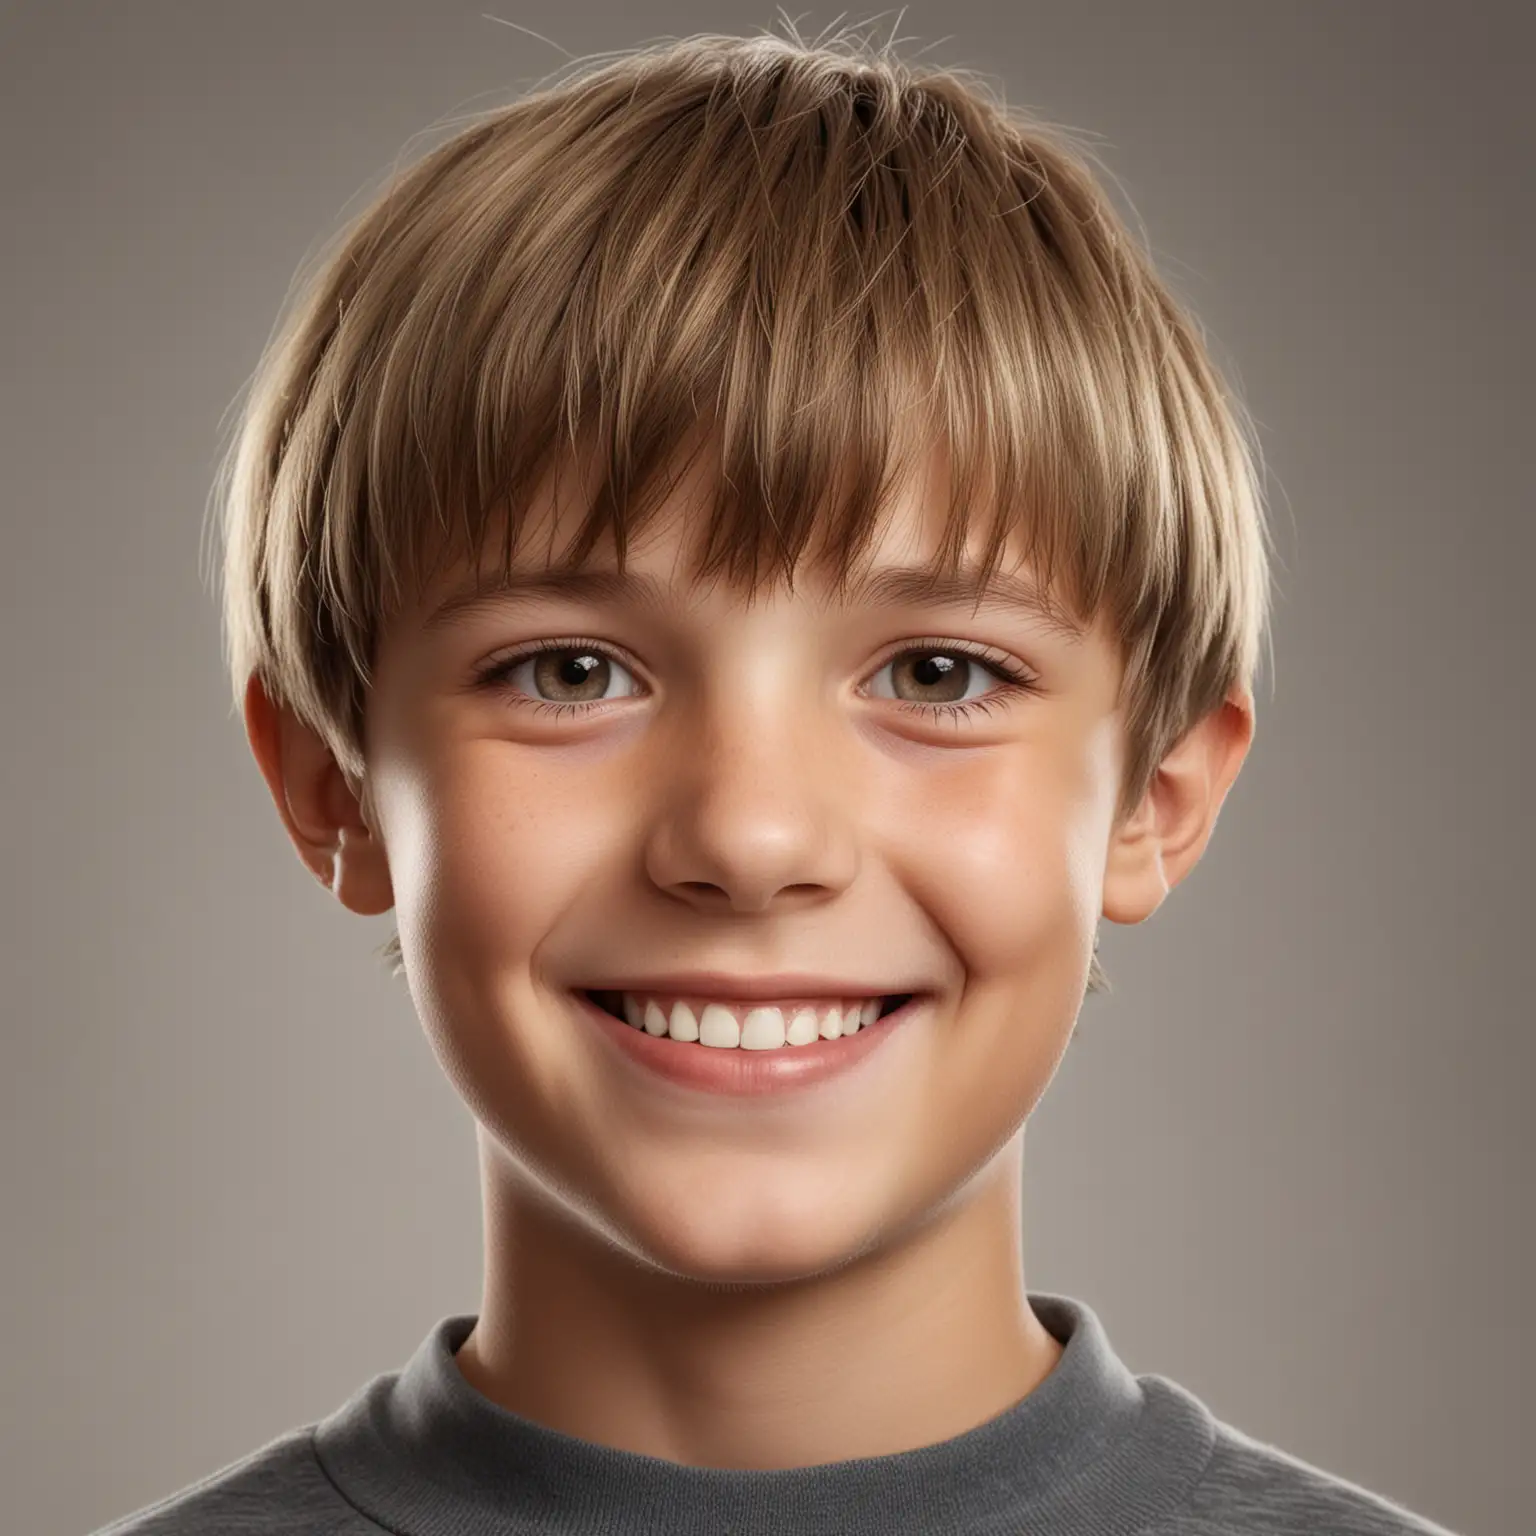 Portrait of Smiling ThirteenYearOld Boy with Soft Shiny Bowl Cut Hair in Natural Light